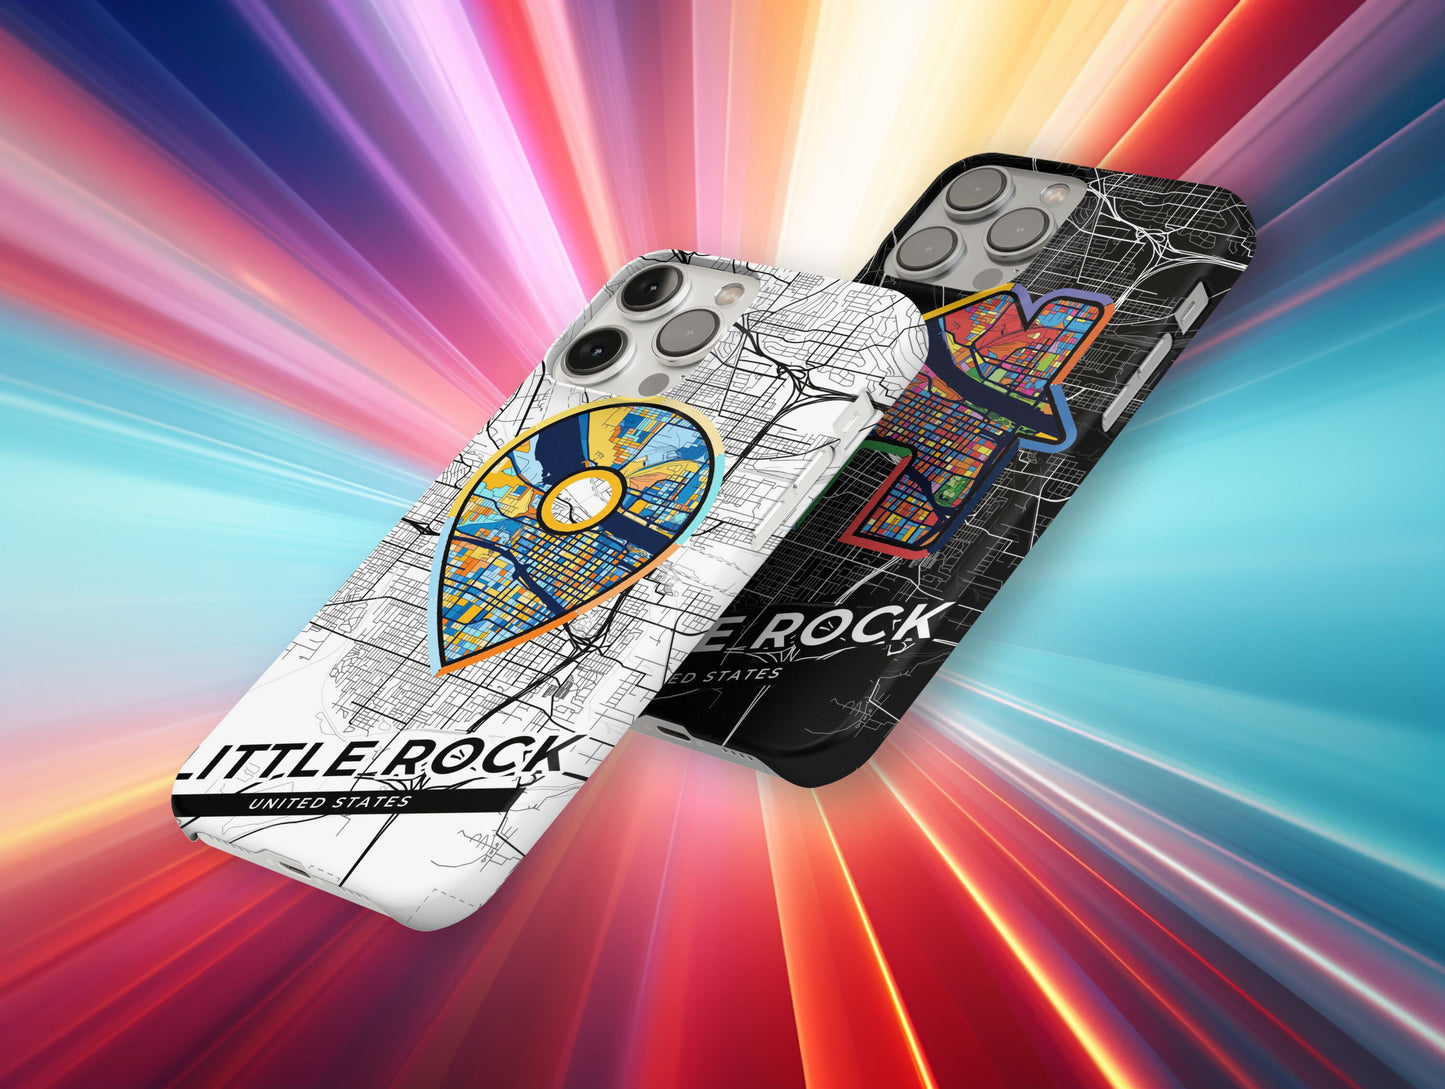 Little Rock Arkansas slim phone case with colorful icon. Birthday, wedding or housewarming gift. Couple match cases.